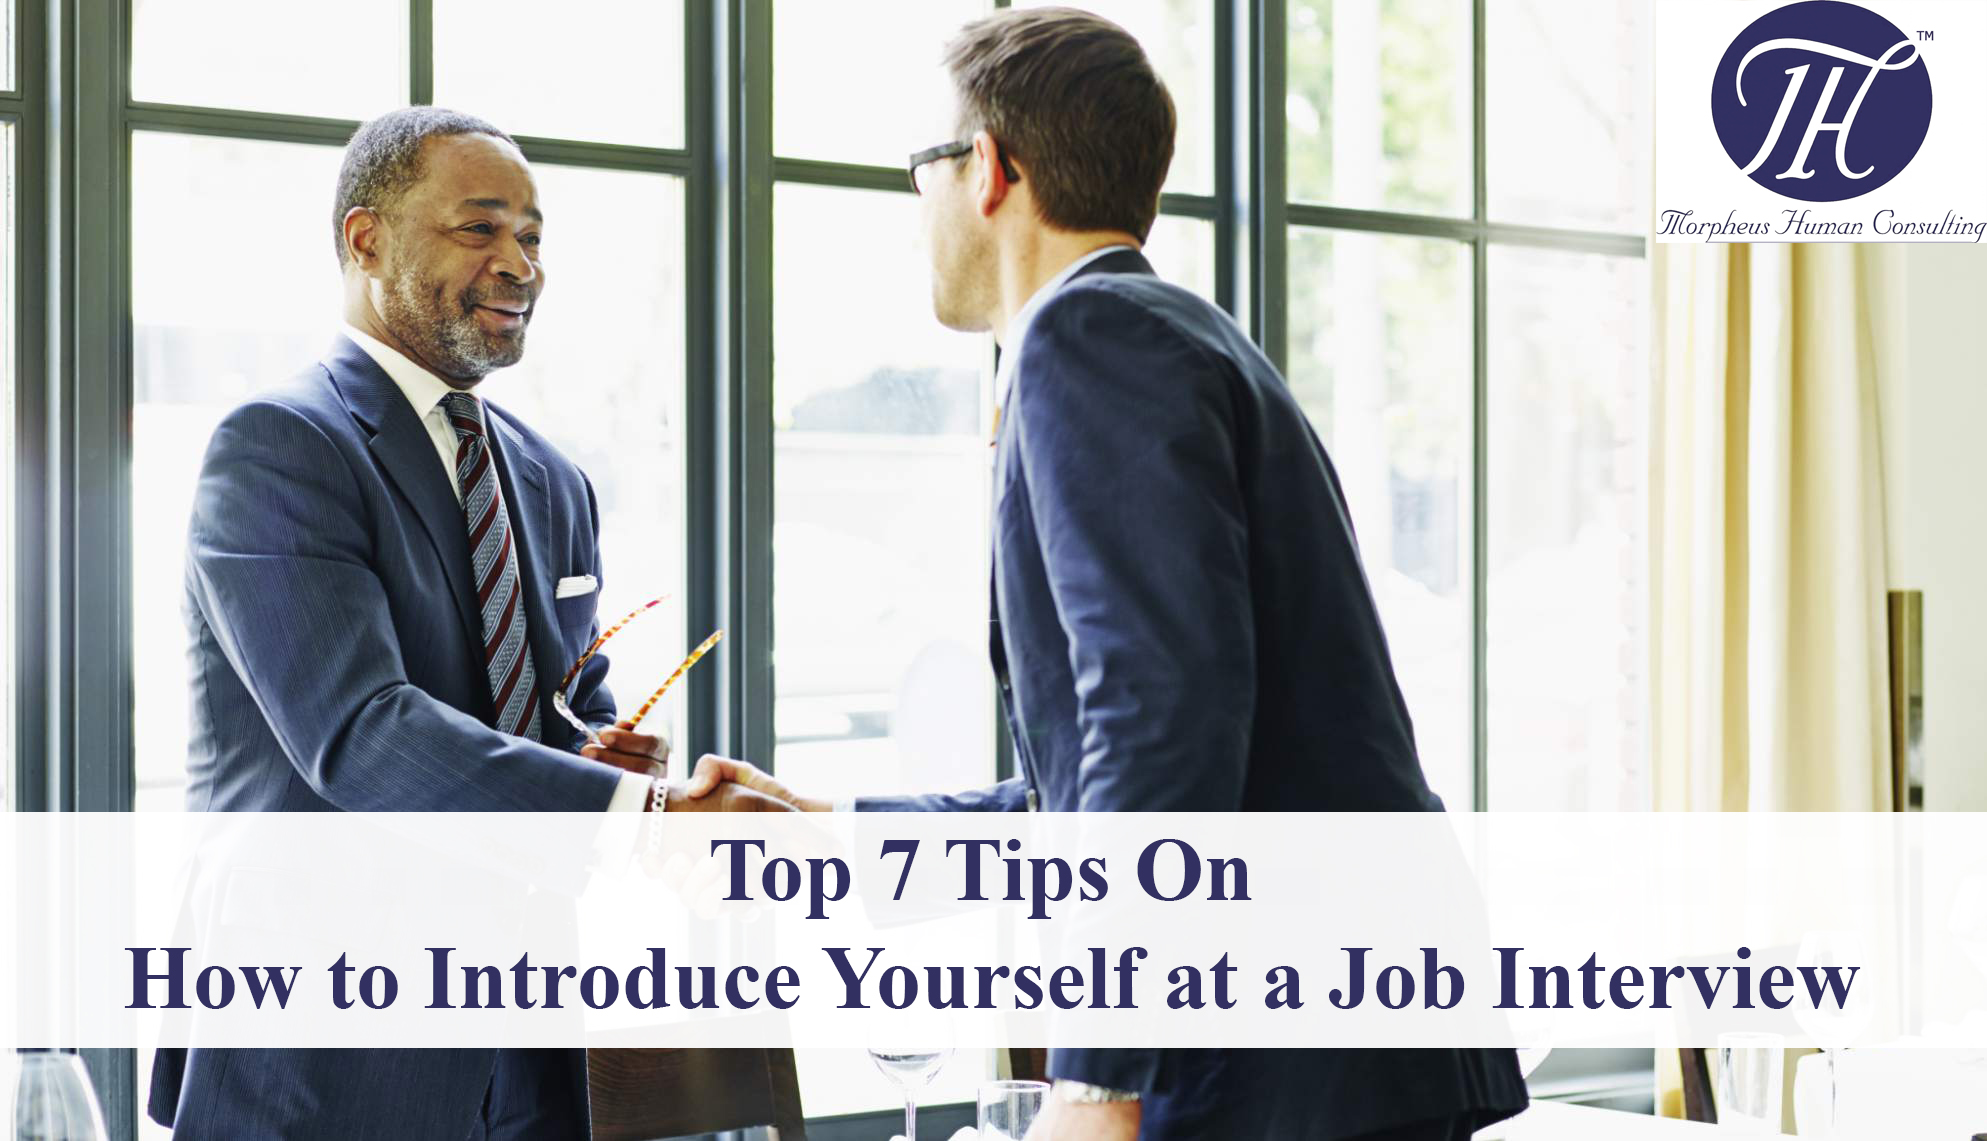 The best way to present yourself for a job interview